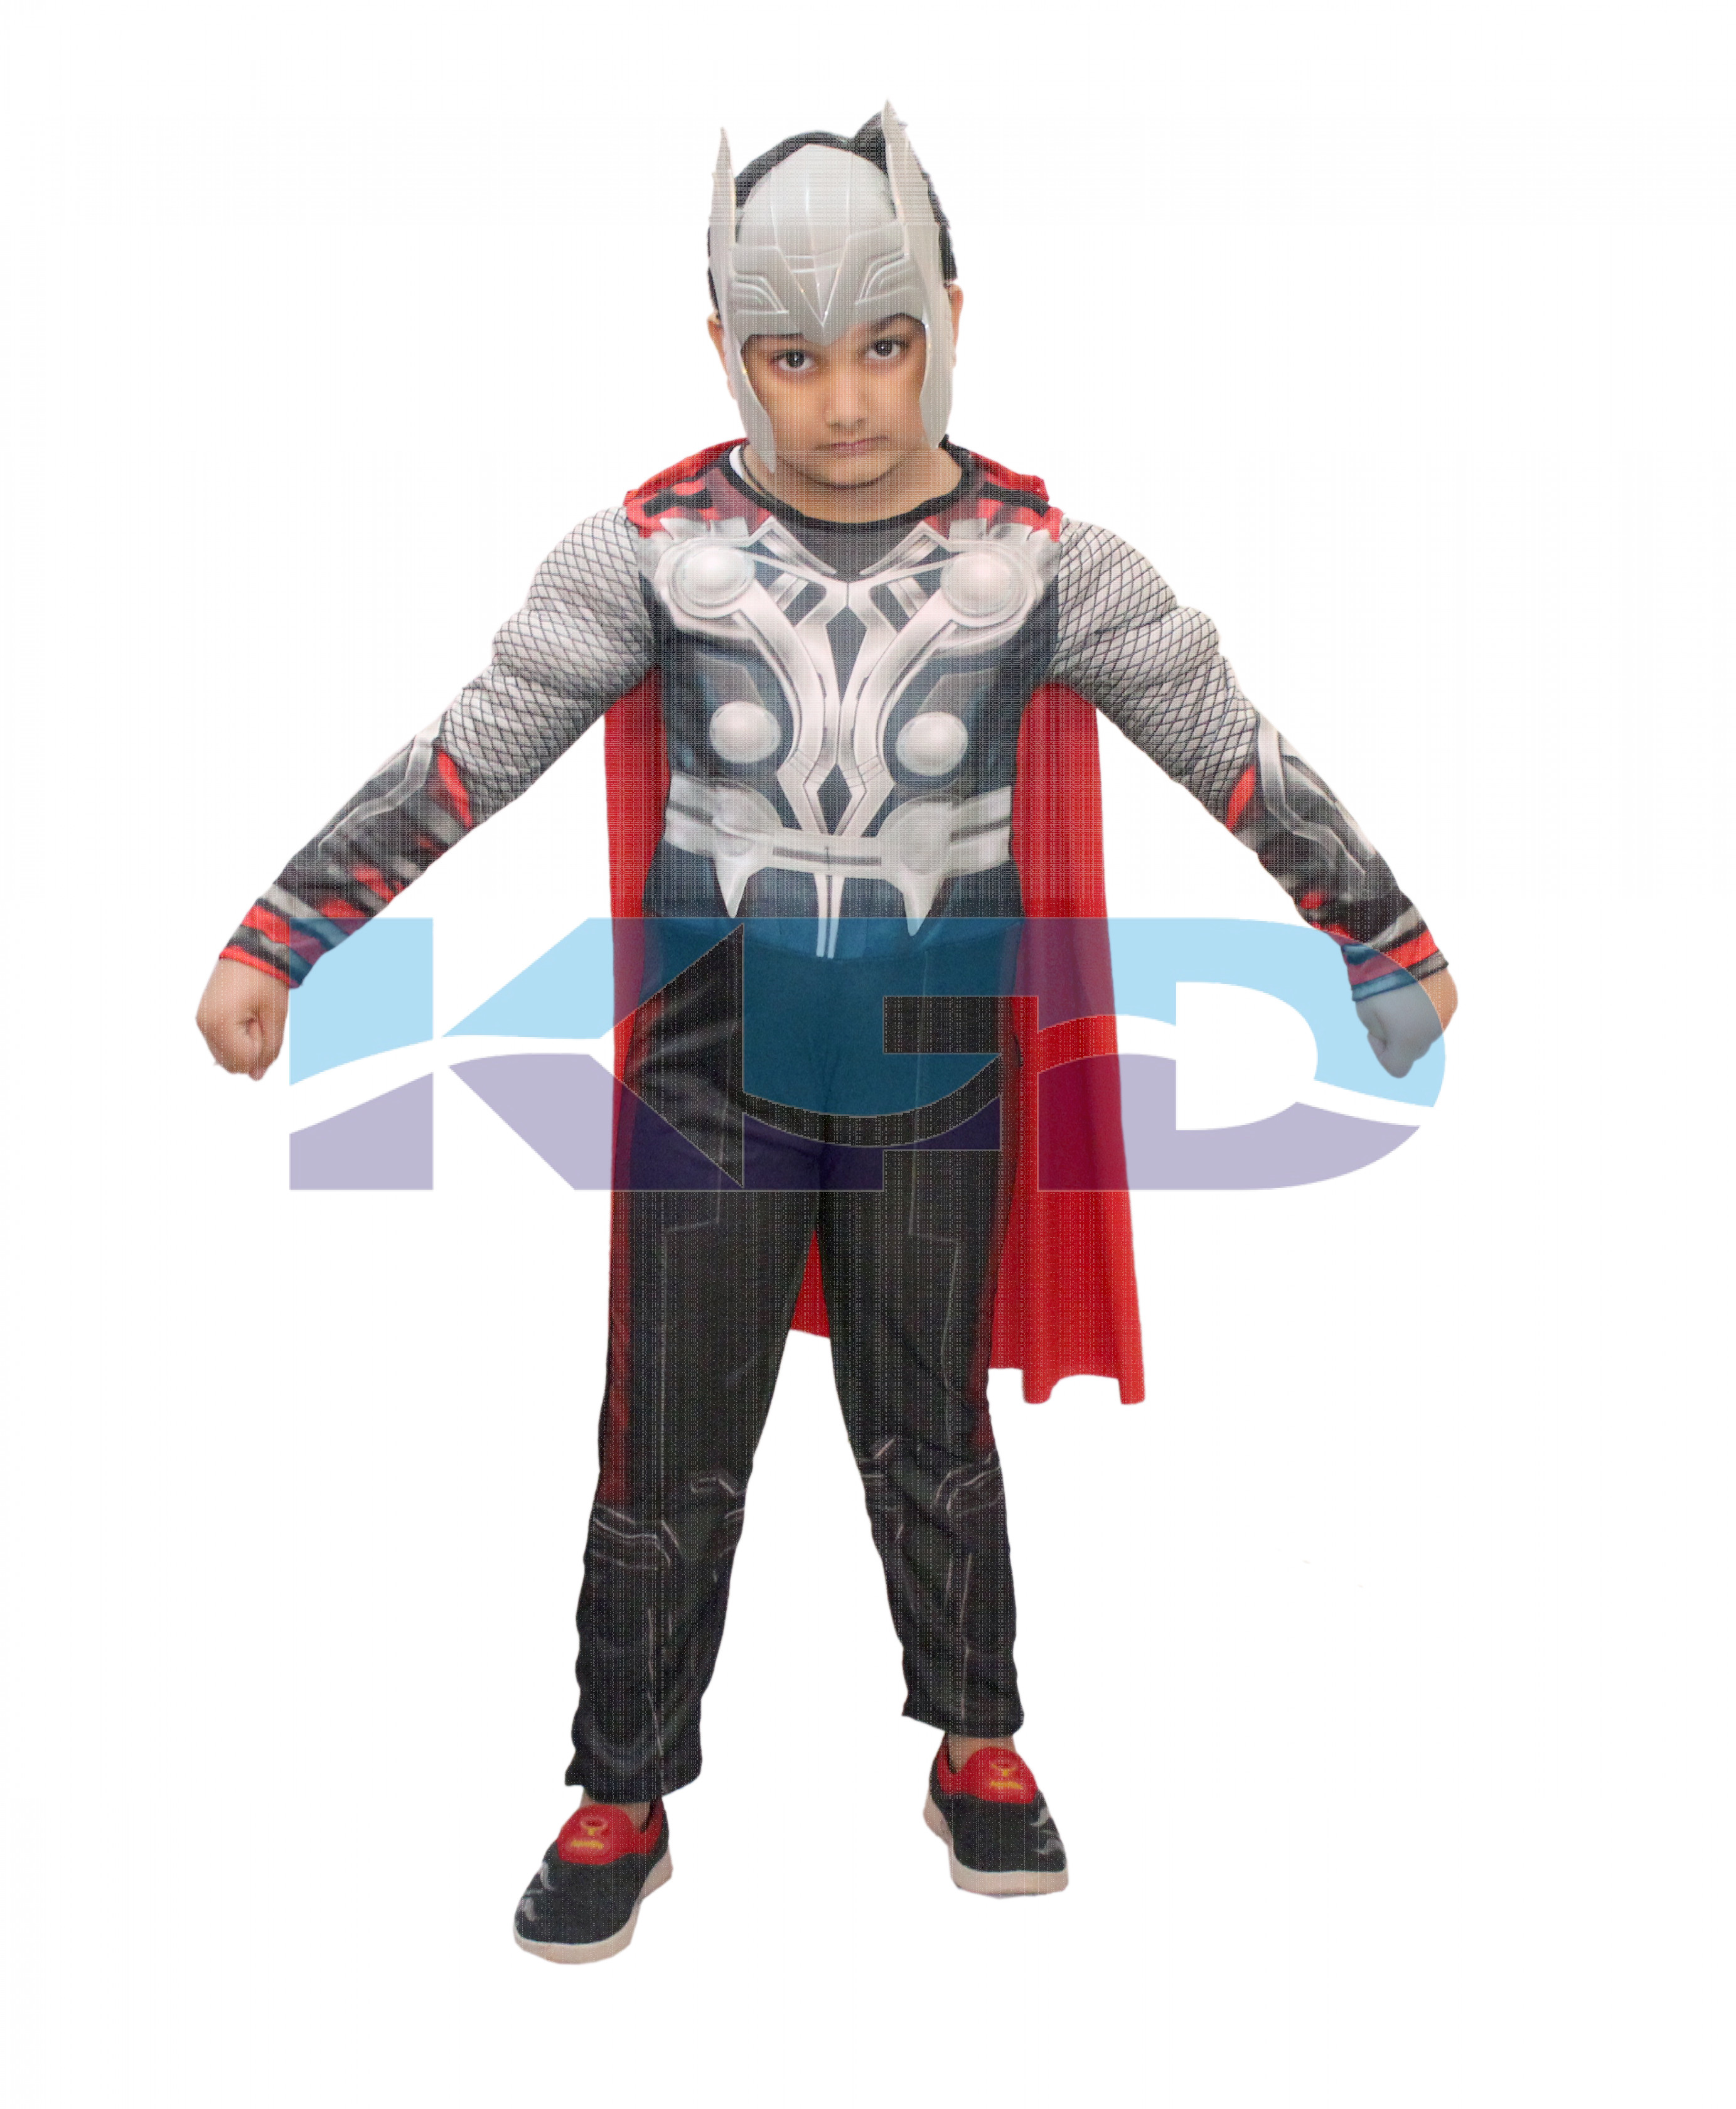 Thor fancy dress for kids,Cartoon/superhero Costume for School Annual function/Theme Party/Competition/Stage Shows Dress